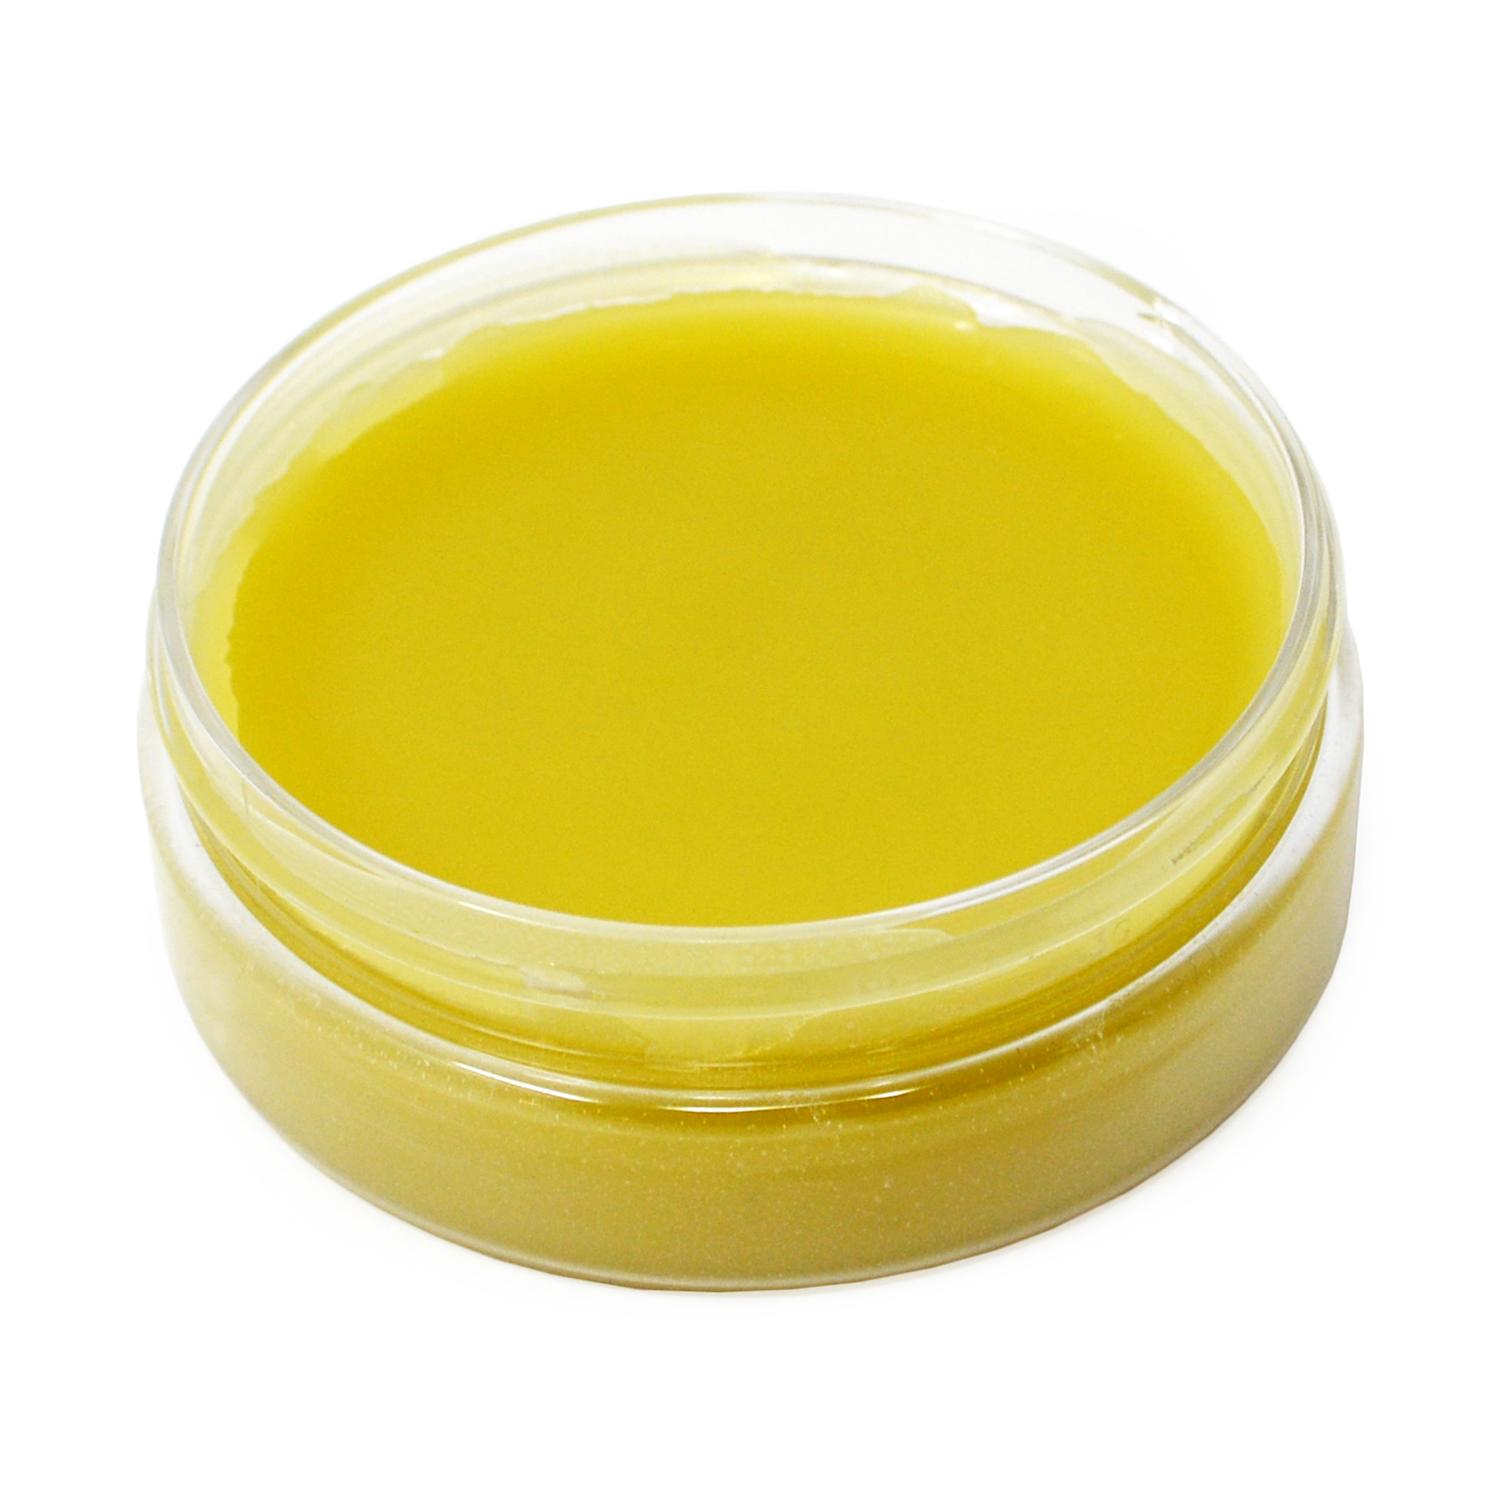 An opened of a tub of Hownd Hemp natural vegan Dry Skin Balm For Dogs